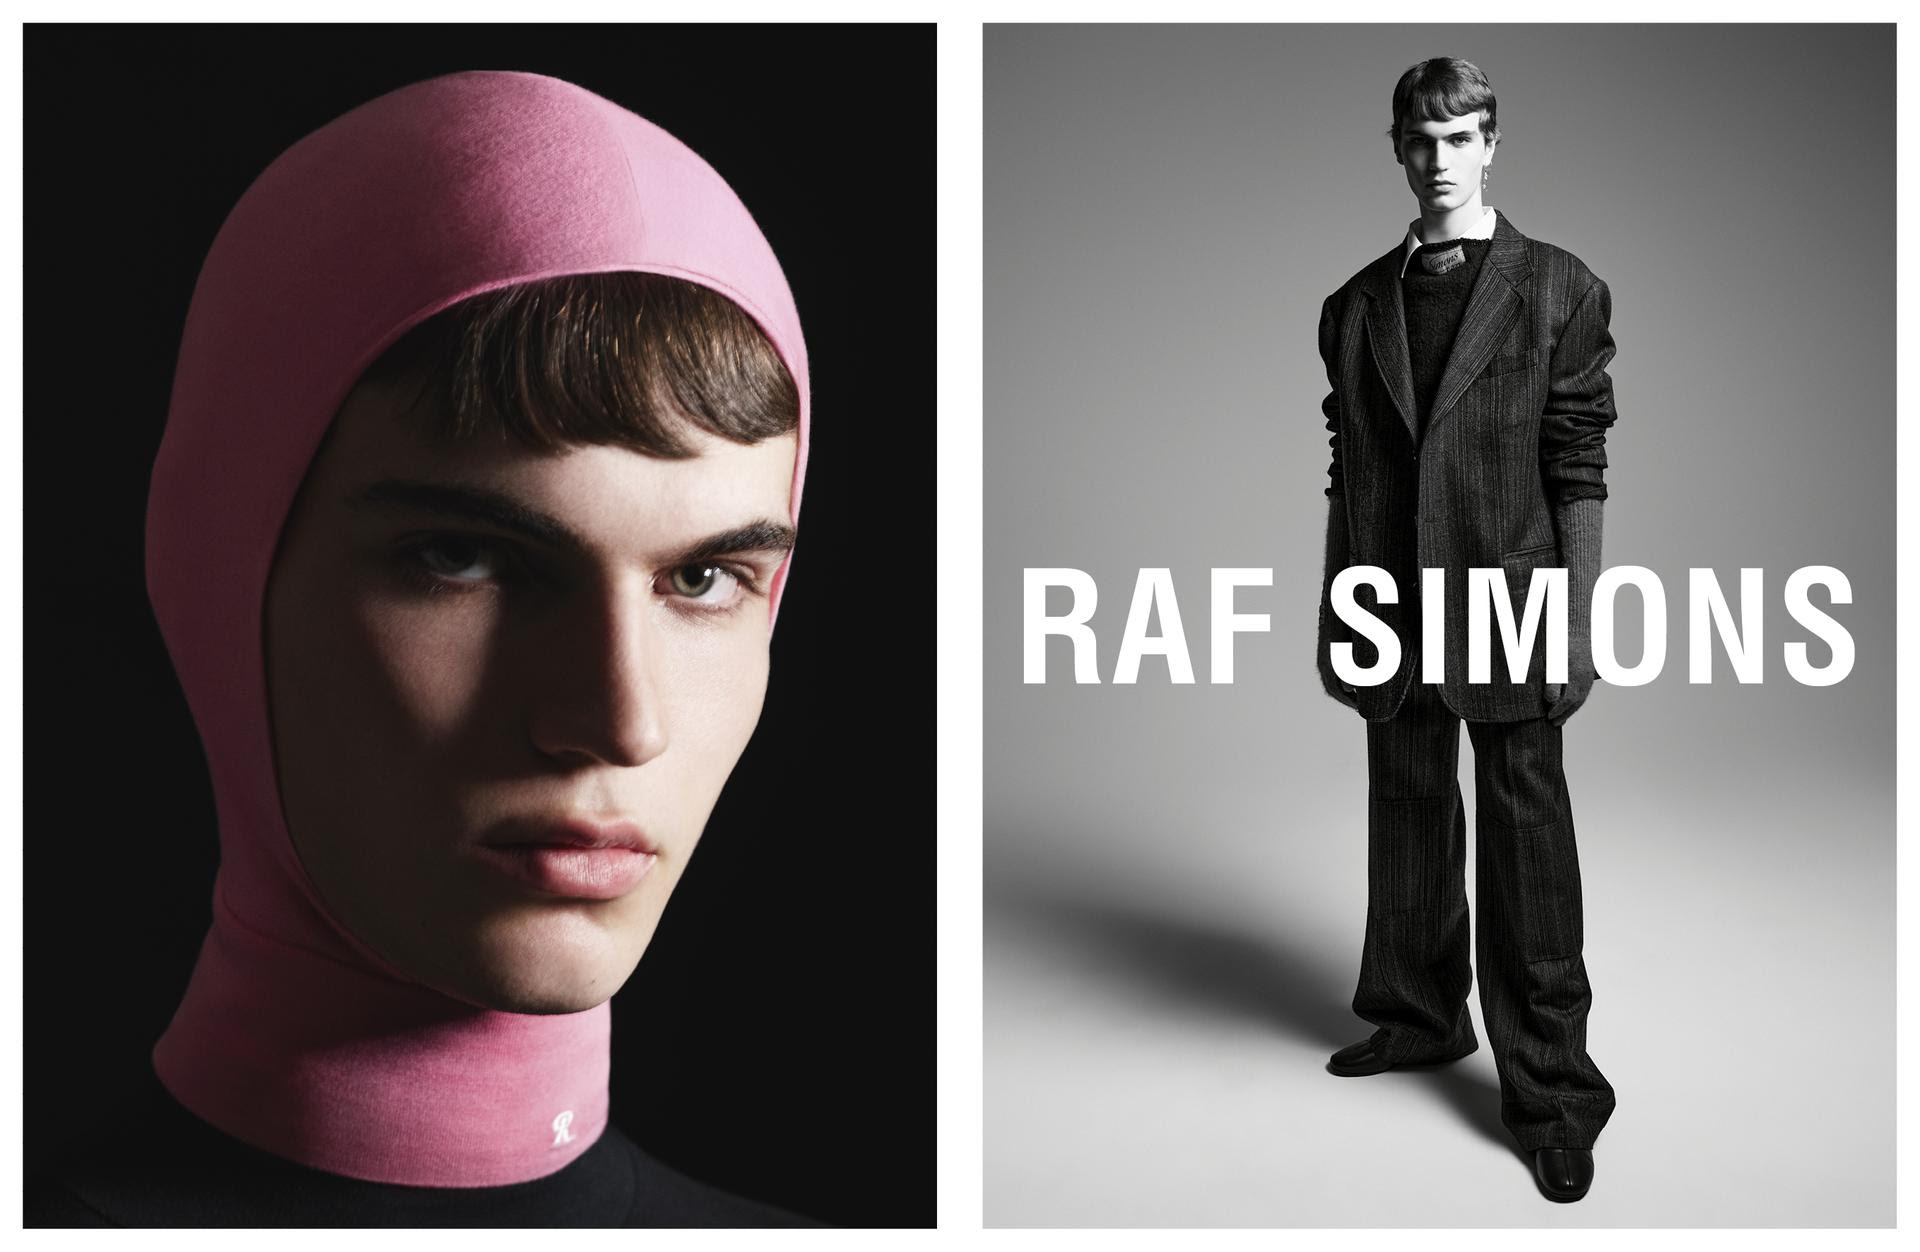  Photo by Willy Vanderperre/Courtesy of Raf Simons.